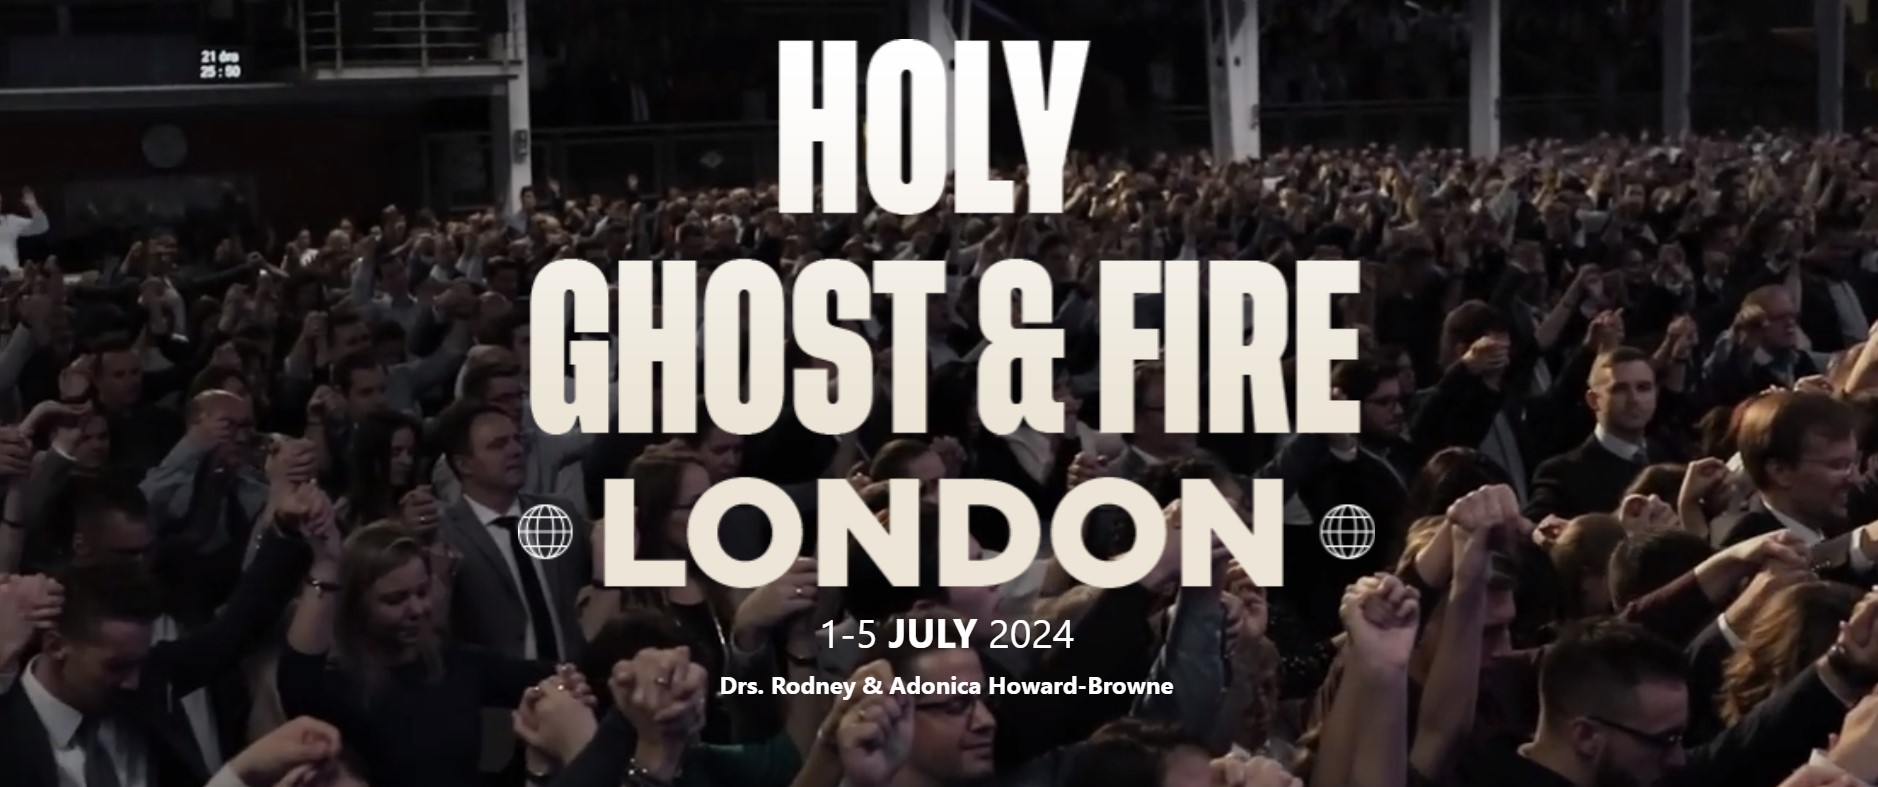 Holy Ghost & Fire London with Dr. Rodney Howard-Browne